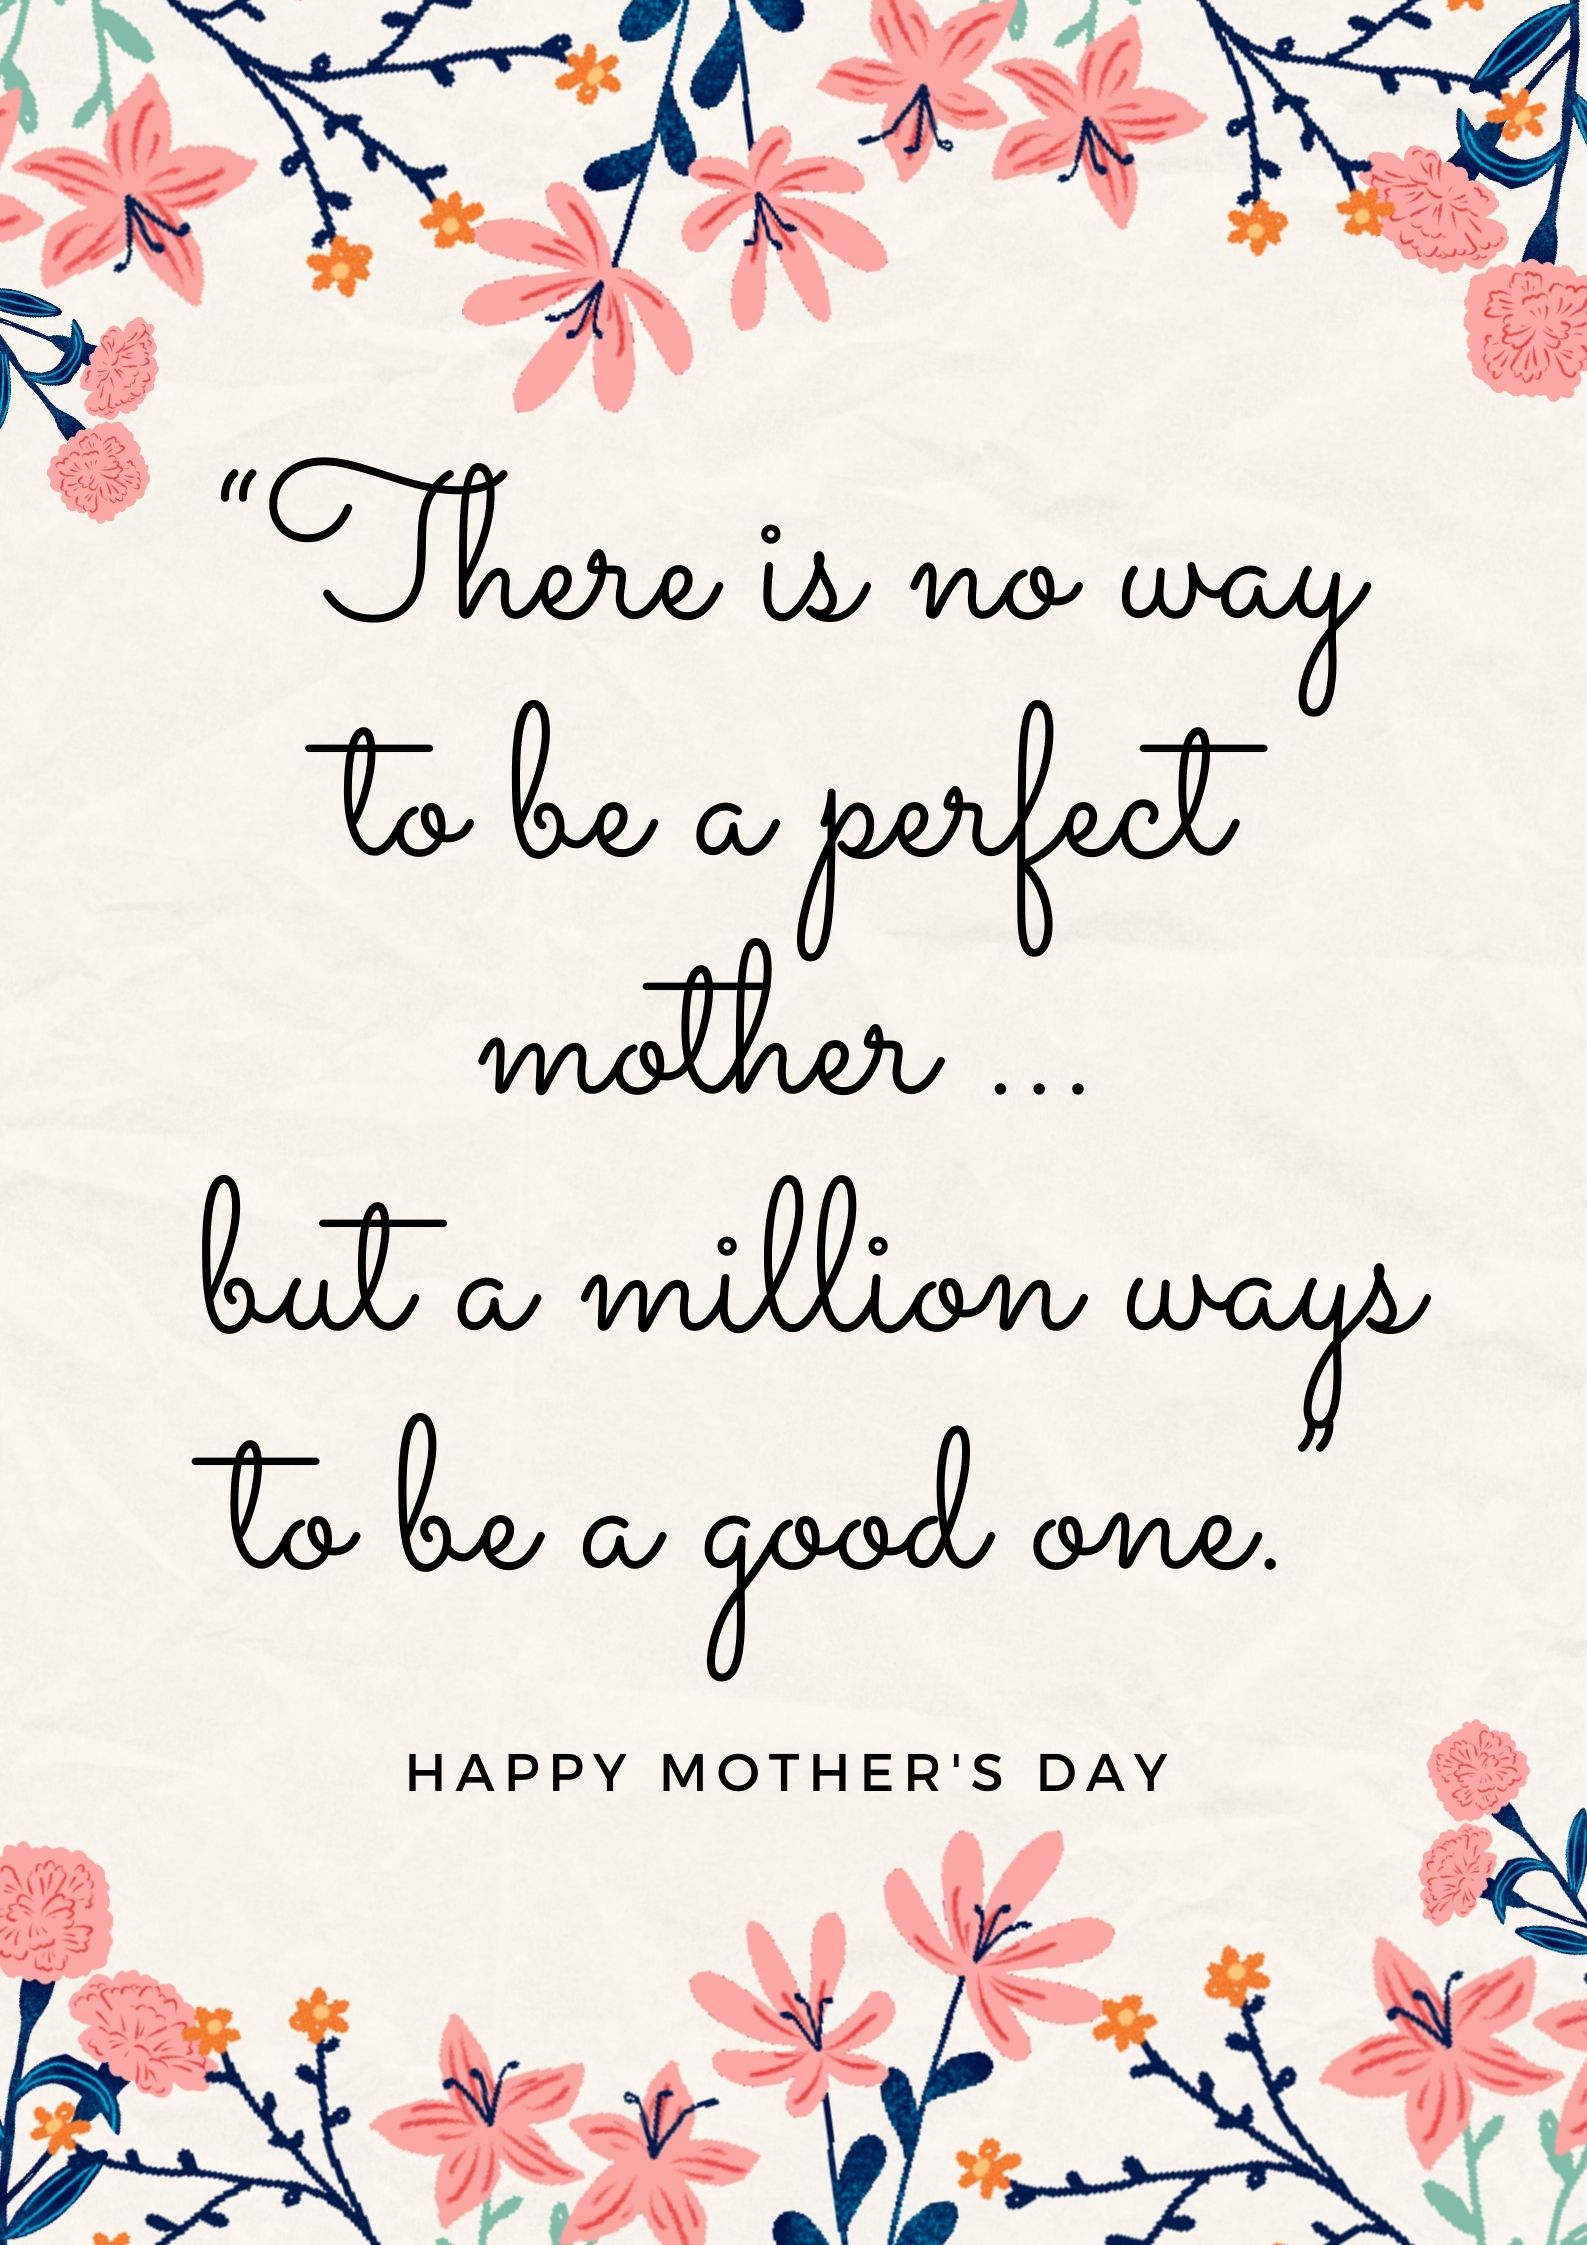 Mother's Day quotes for cards